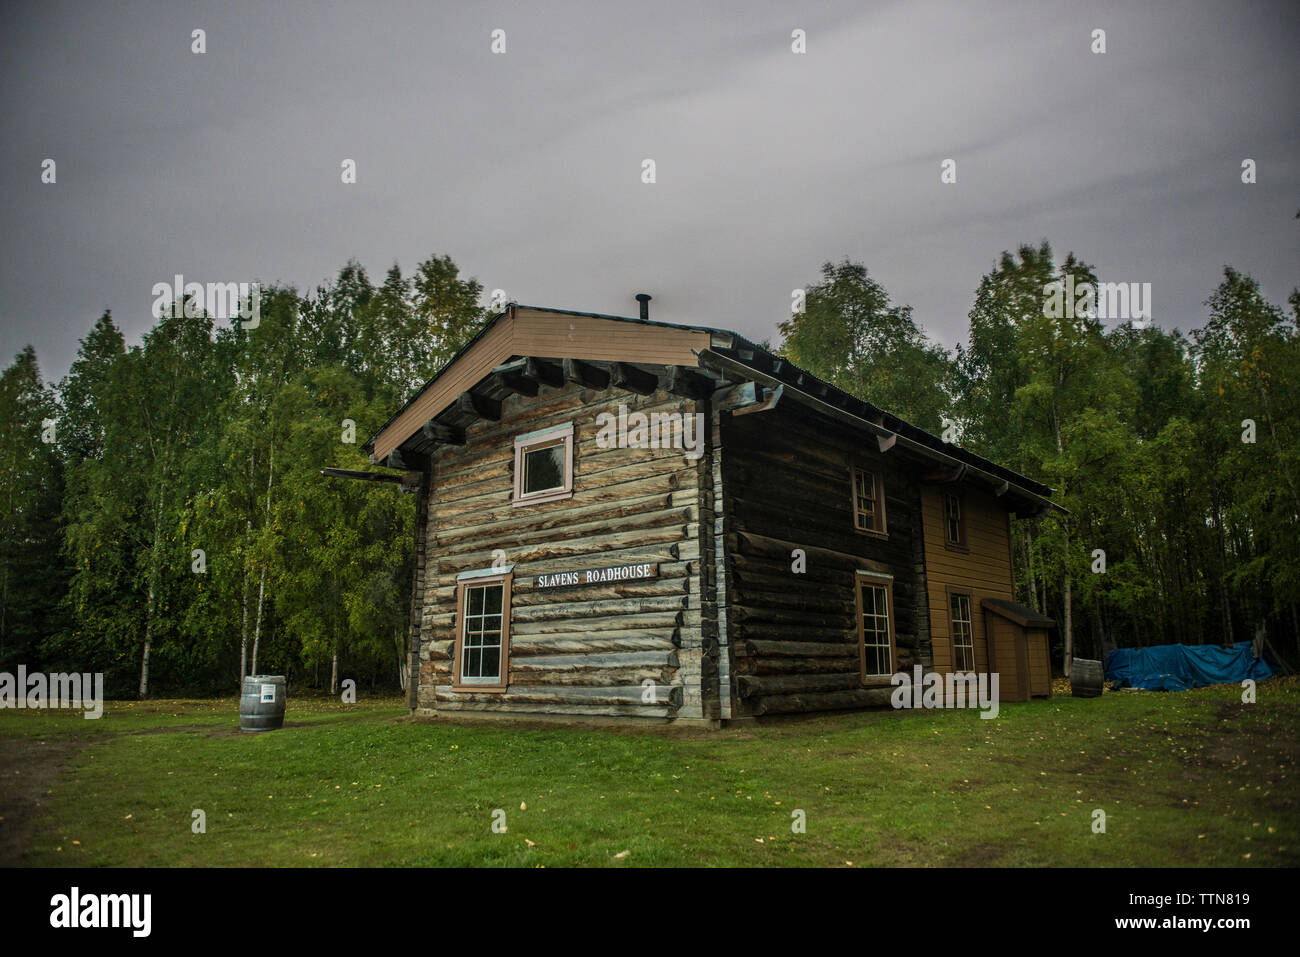 Slaven's roadhouse on field by trees at Yukon Charley Rivers National Preserve against cloudy sky Stock Photo